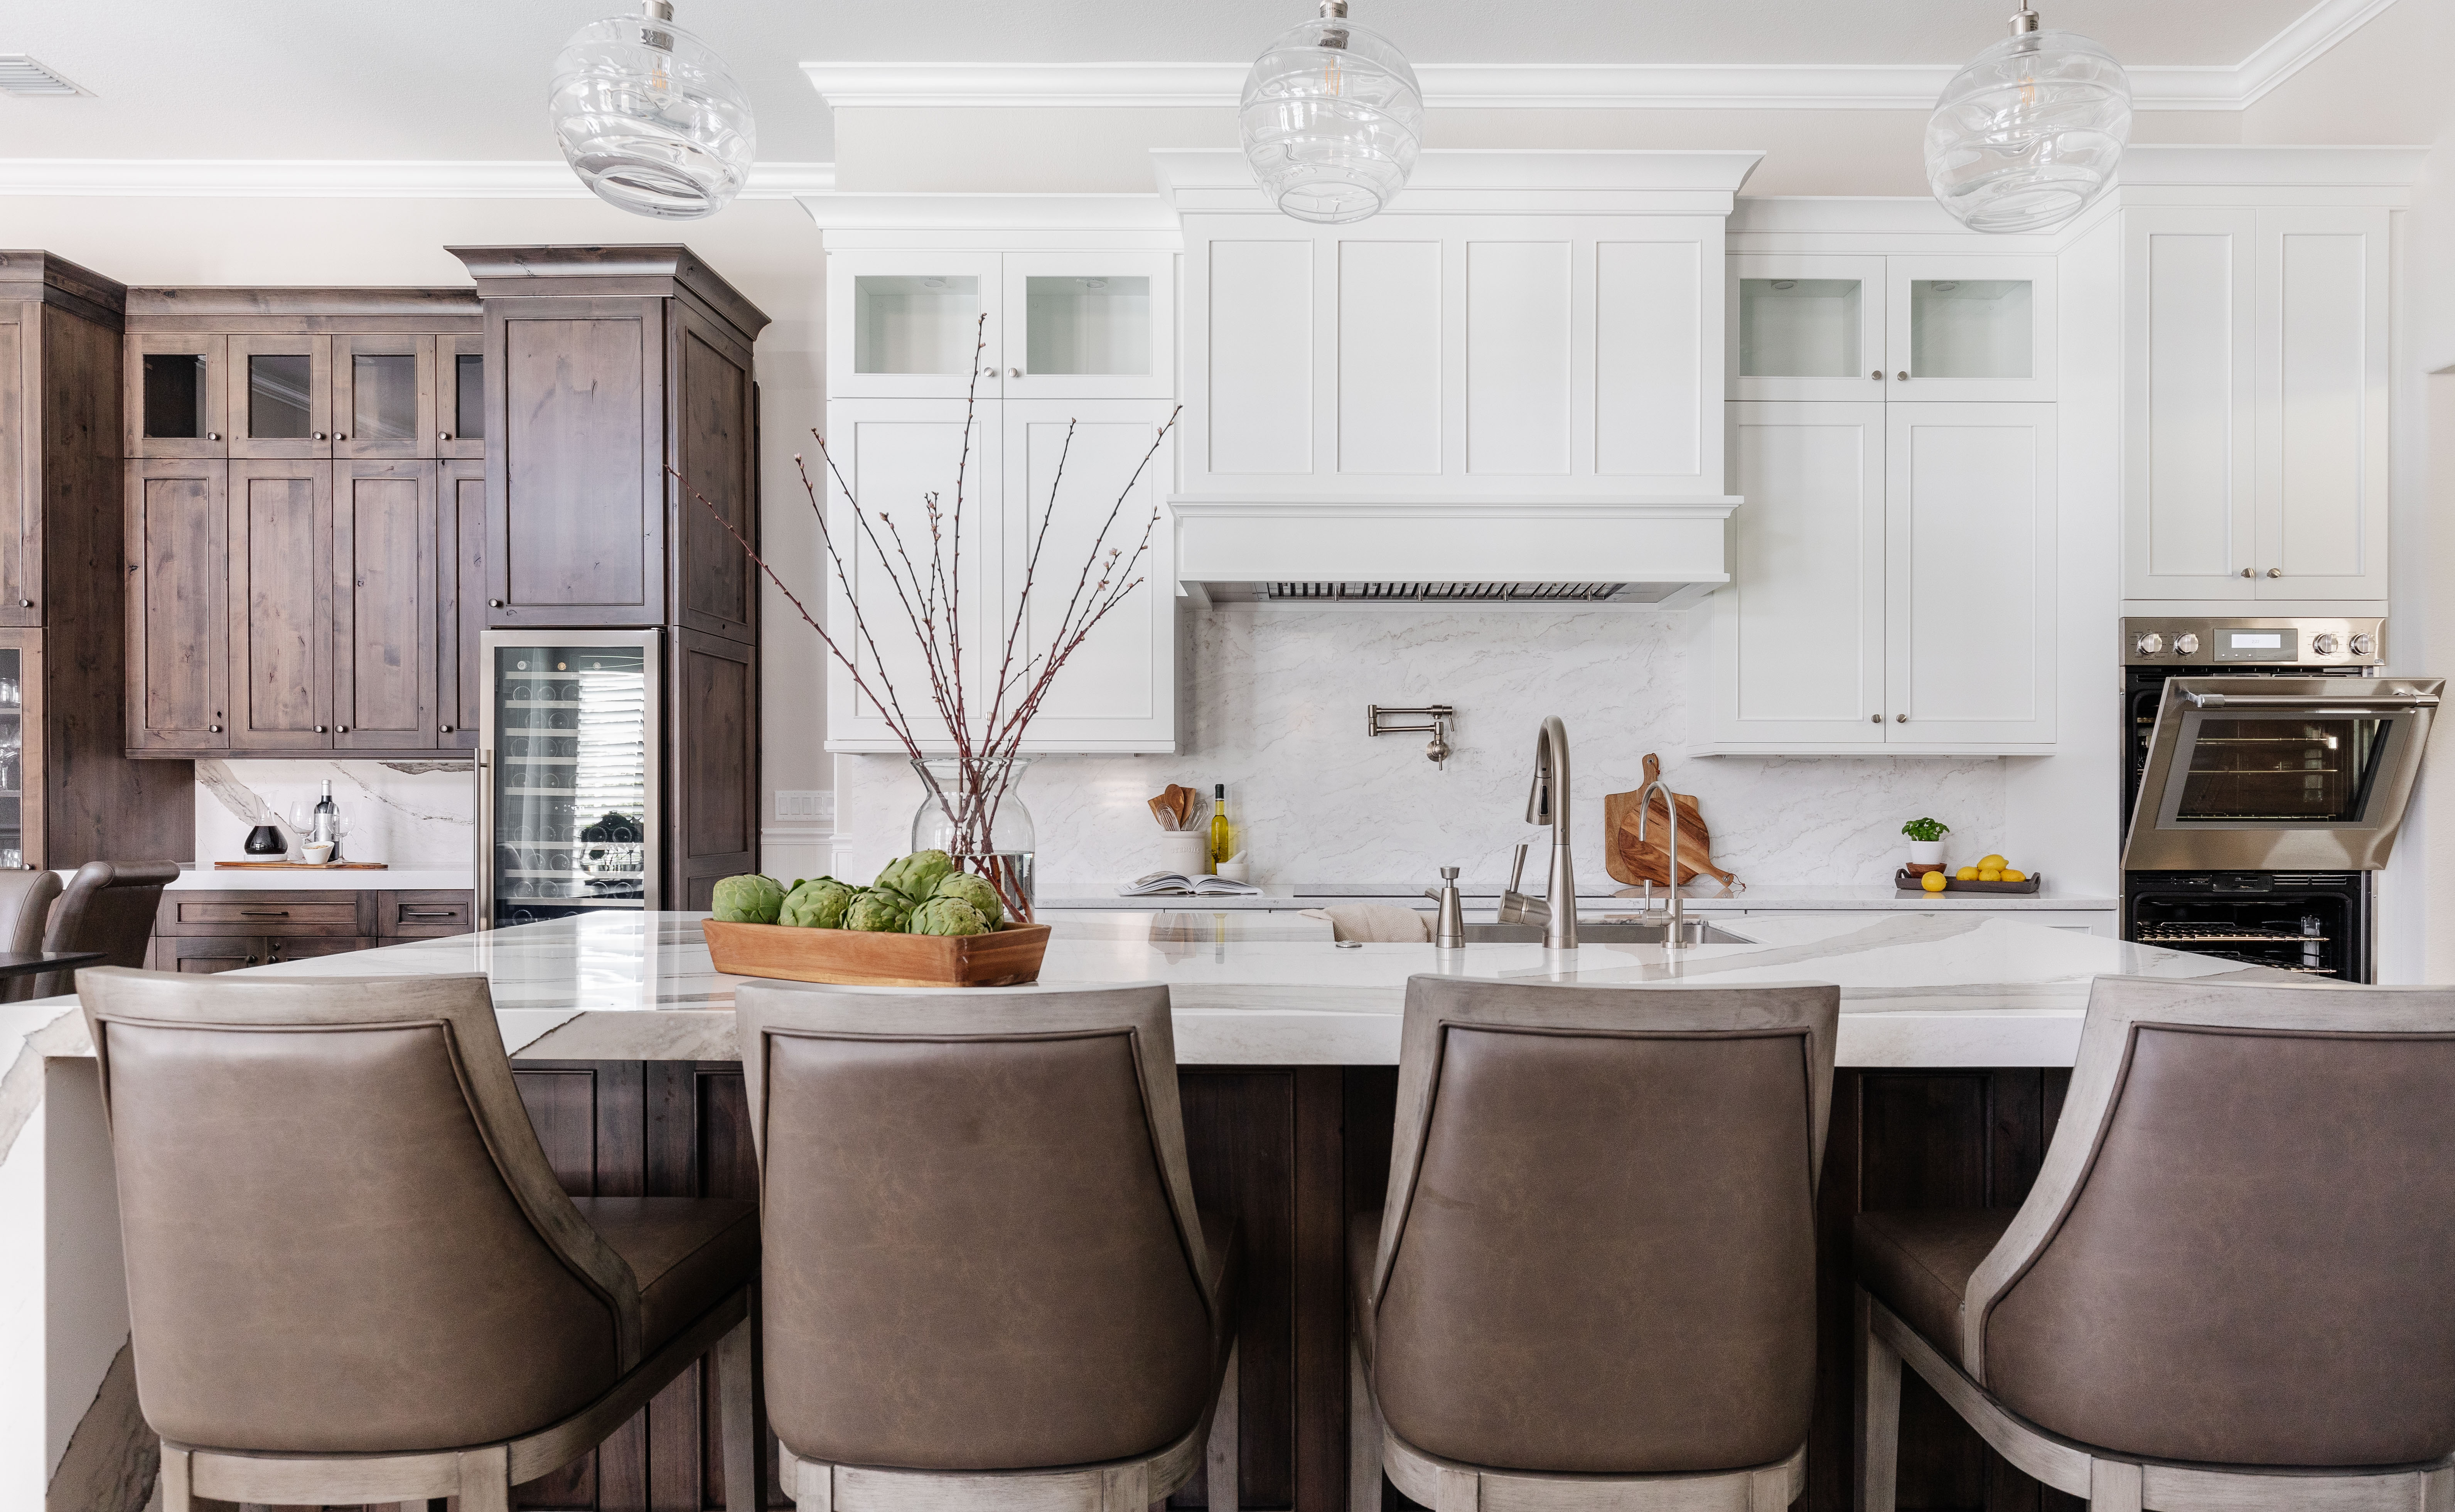 Luxurious, Practical, & Low Maintenance Kitchen for a Busy Family